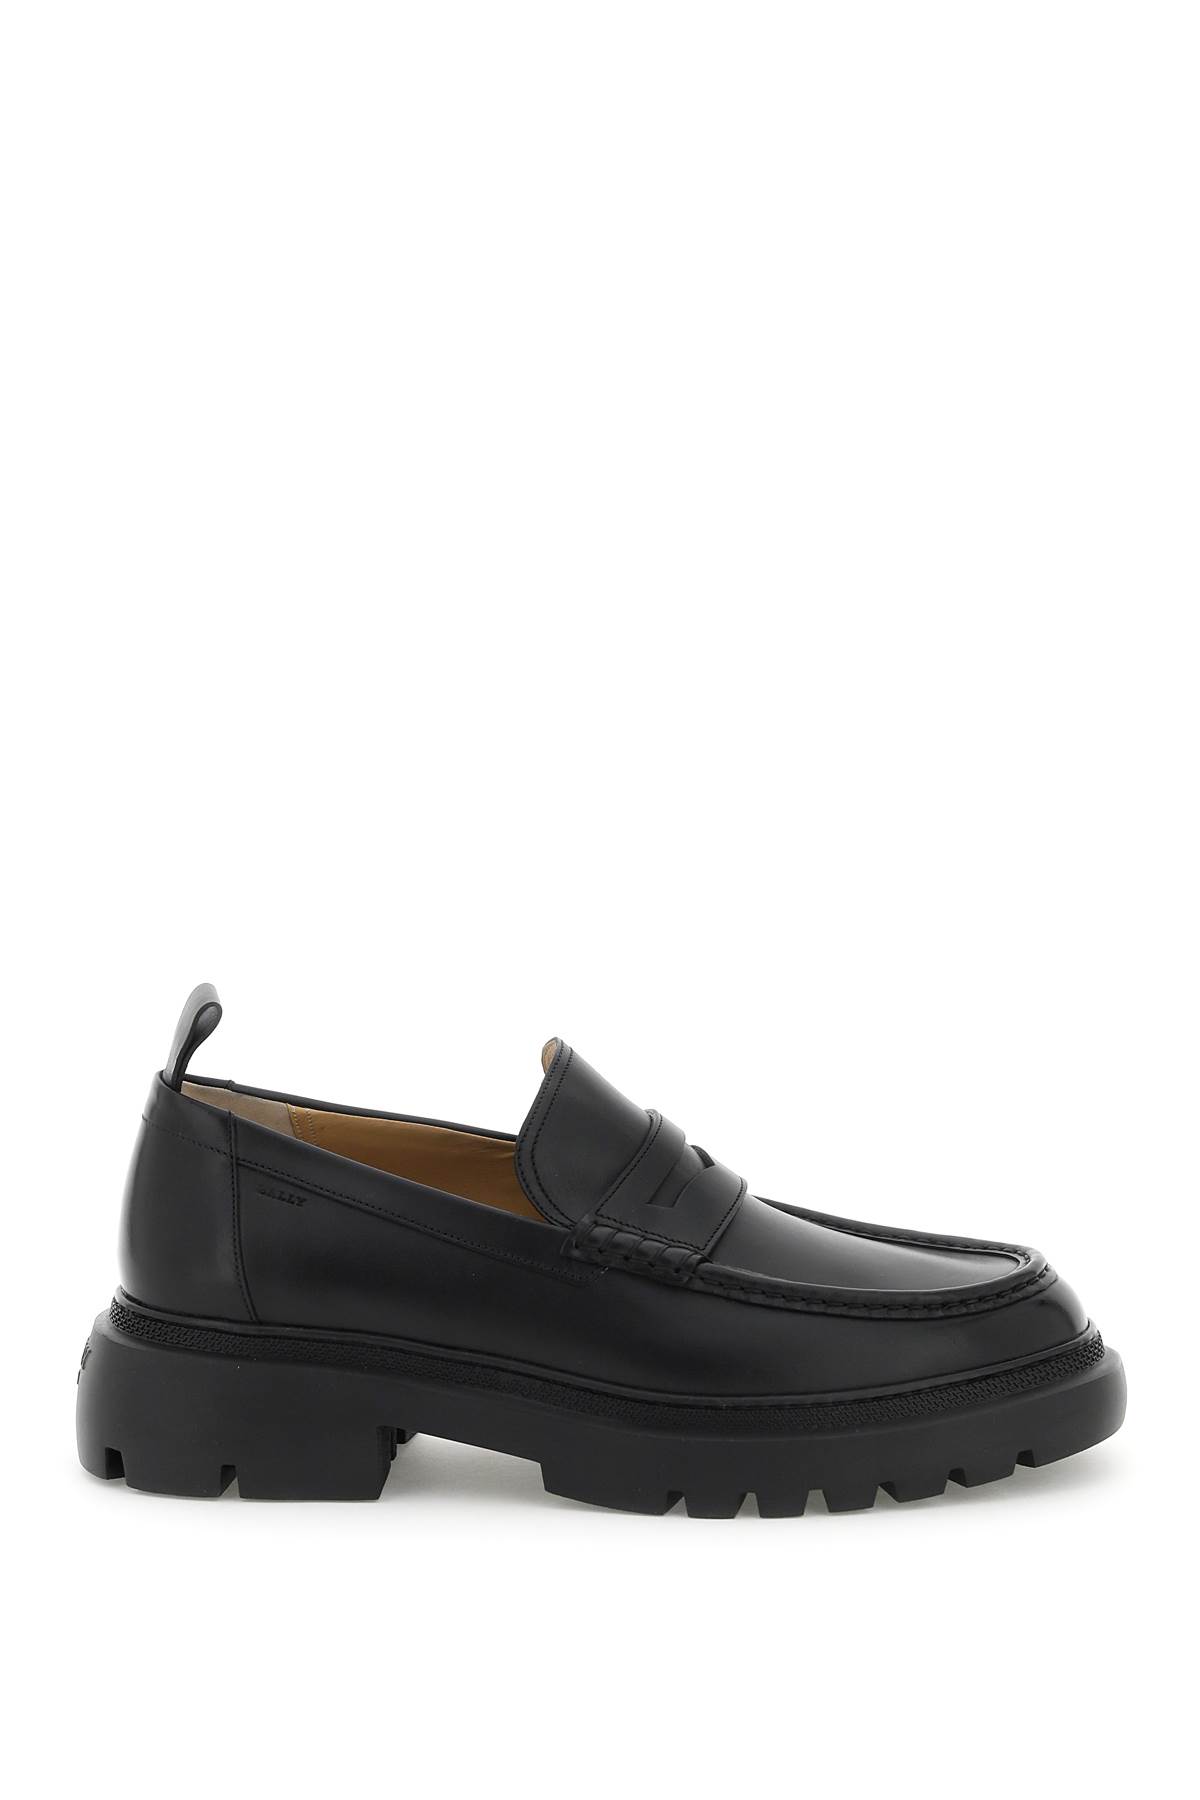 Bally valerio Leather Loafers